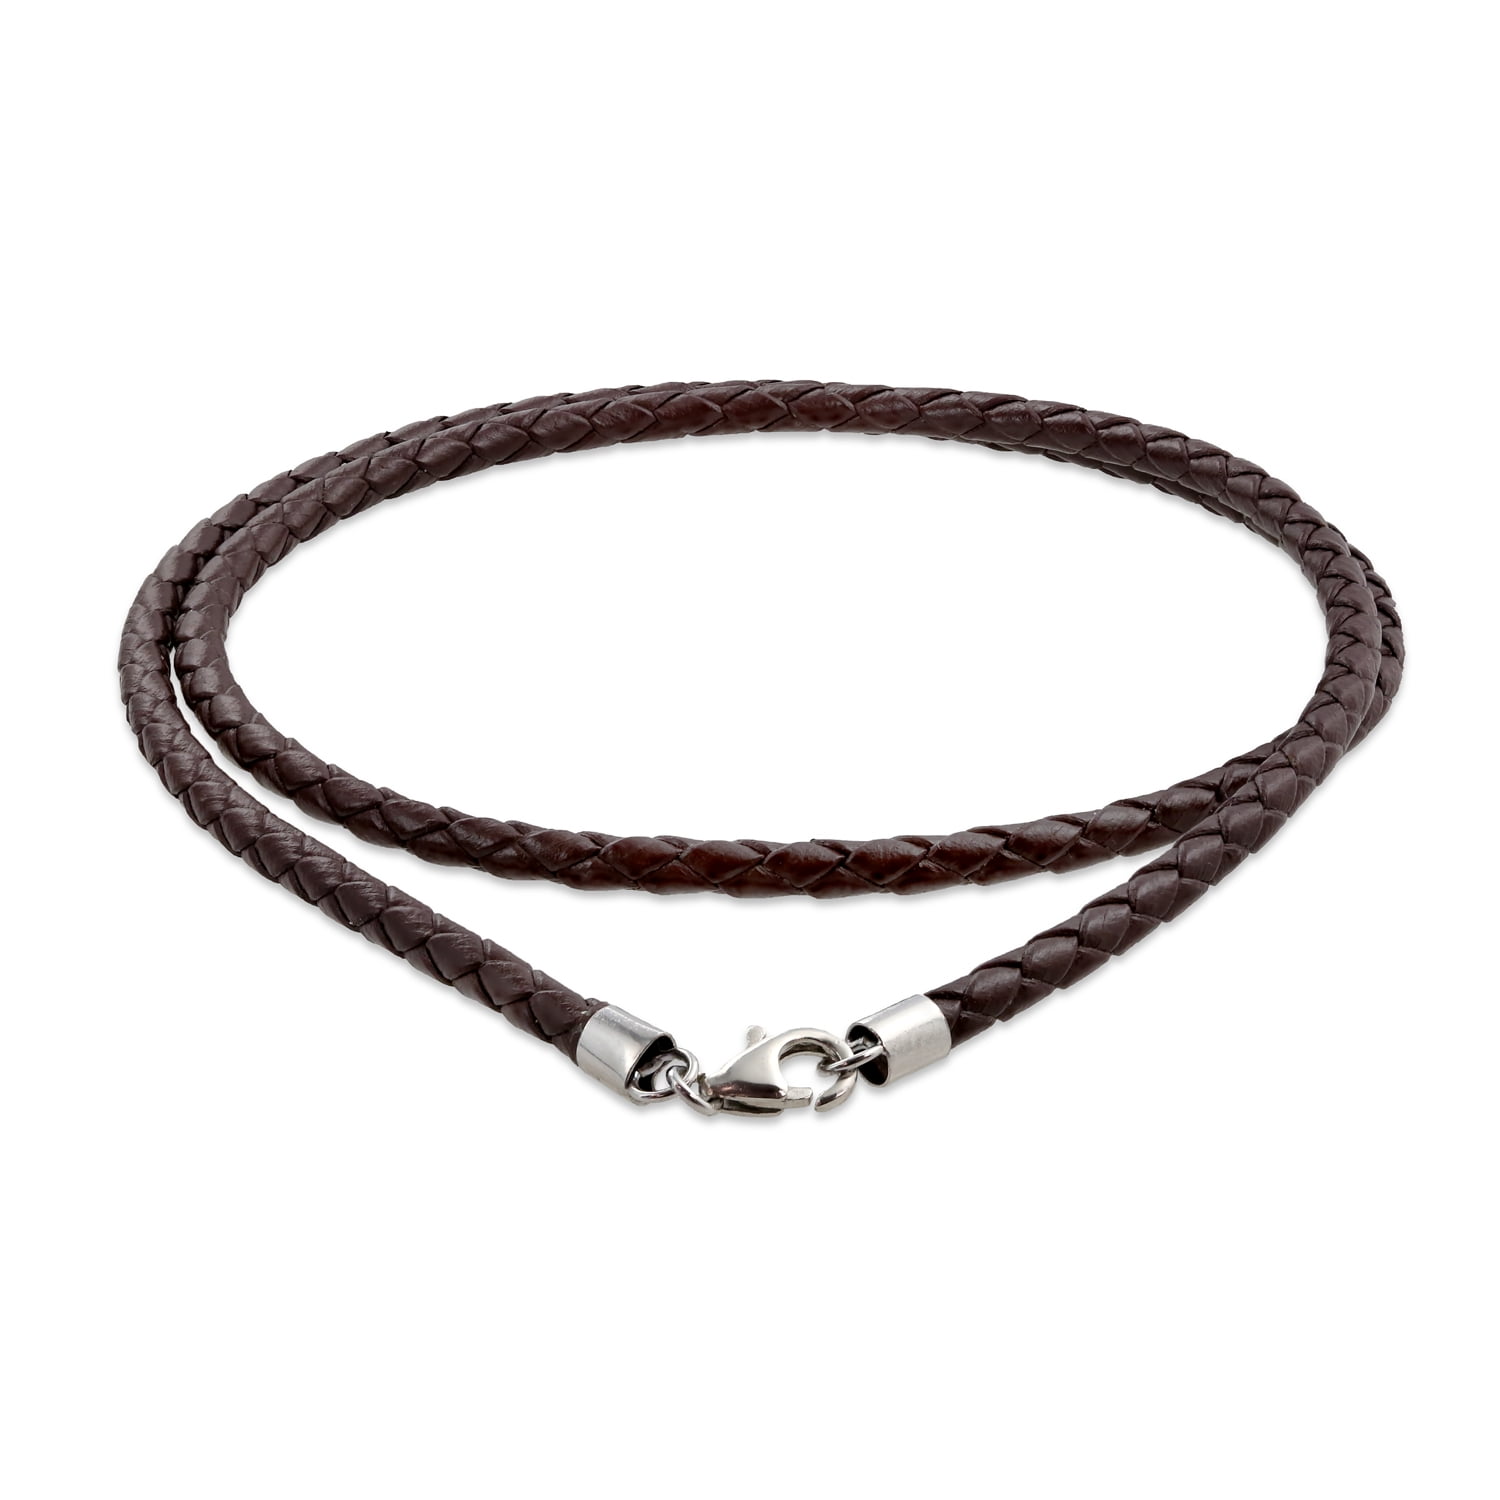 18-Inch 4.5mm Braided Leather Necklace - Brown with Sterling Silver Clasp